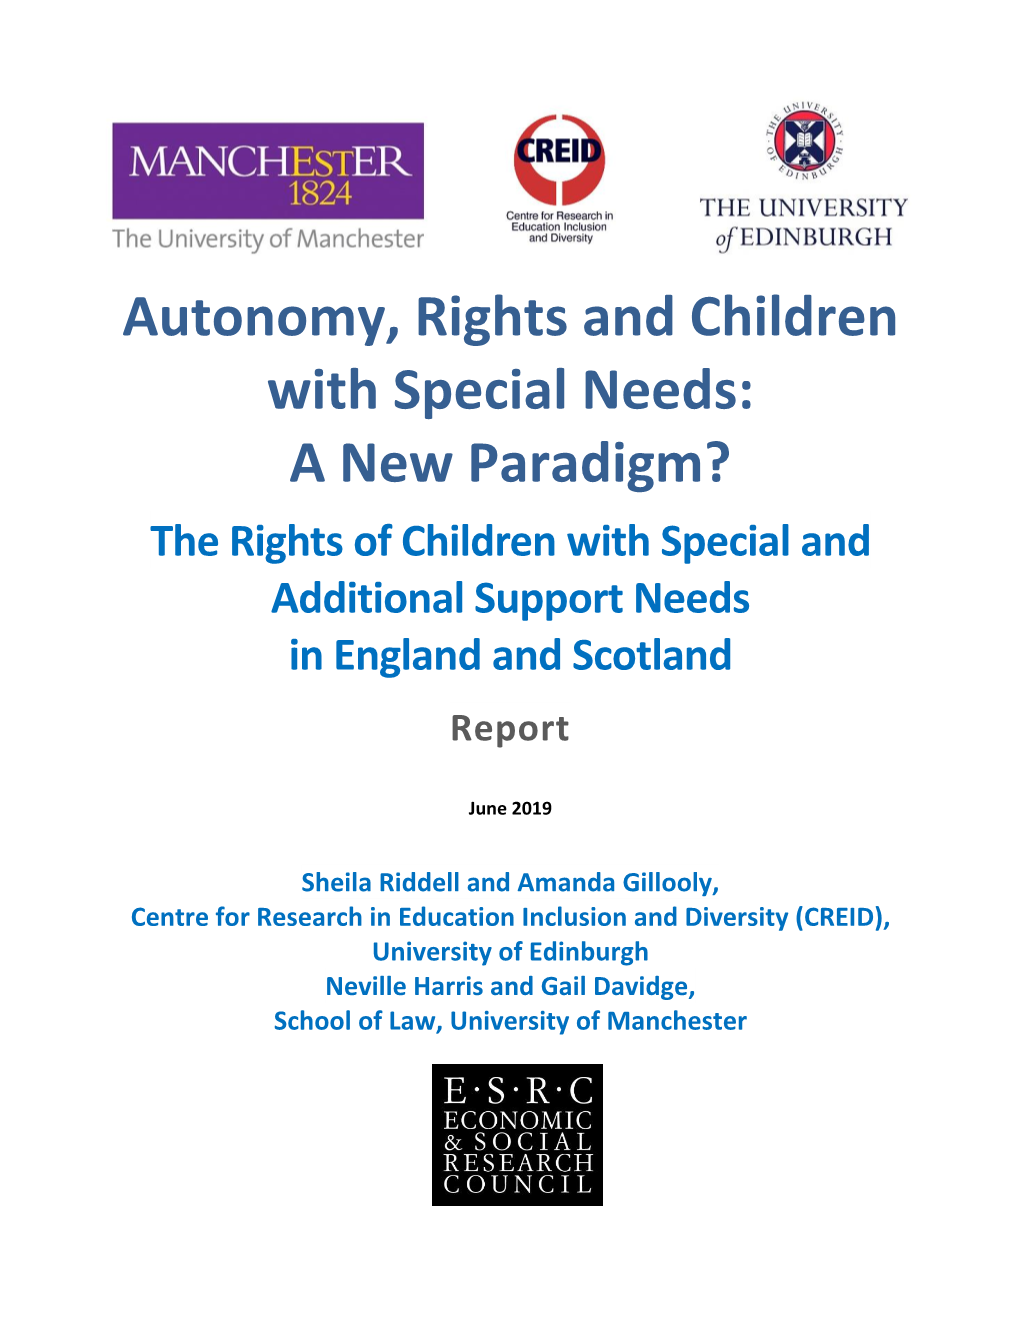 The Rights of Children with Special and Additional Support Needs in England and Scotland Report